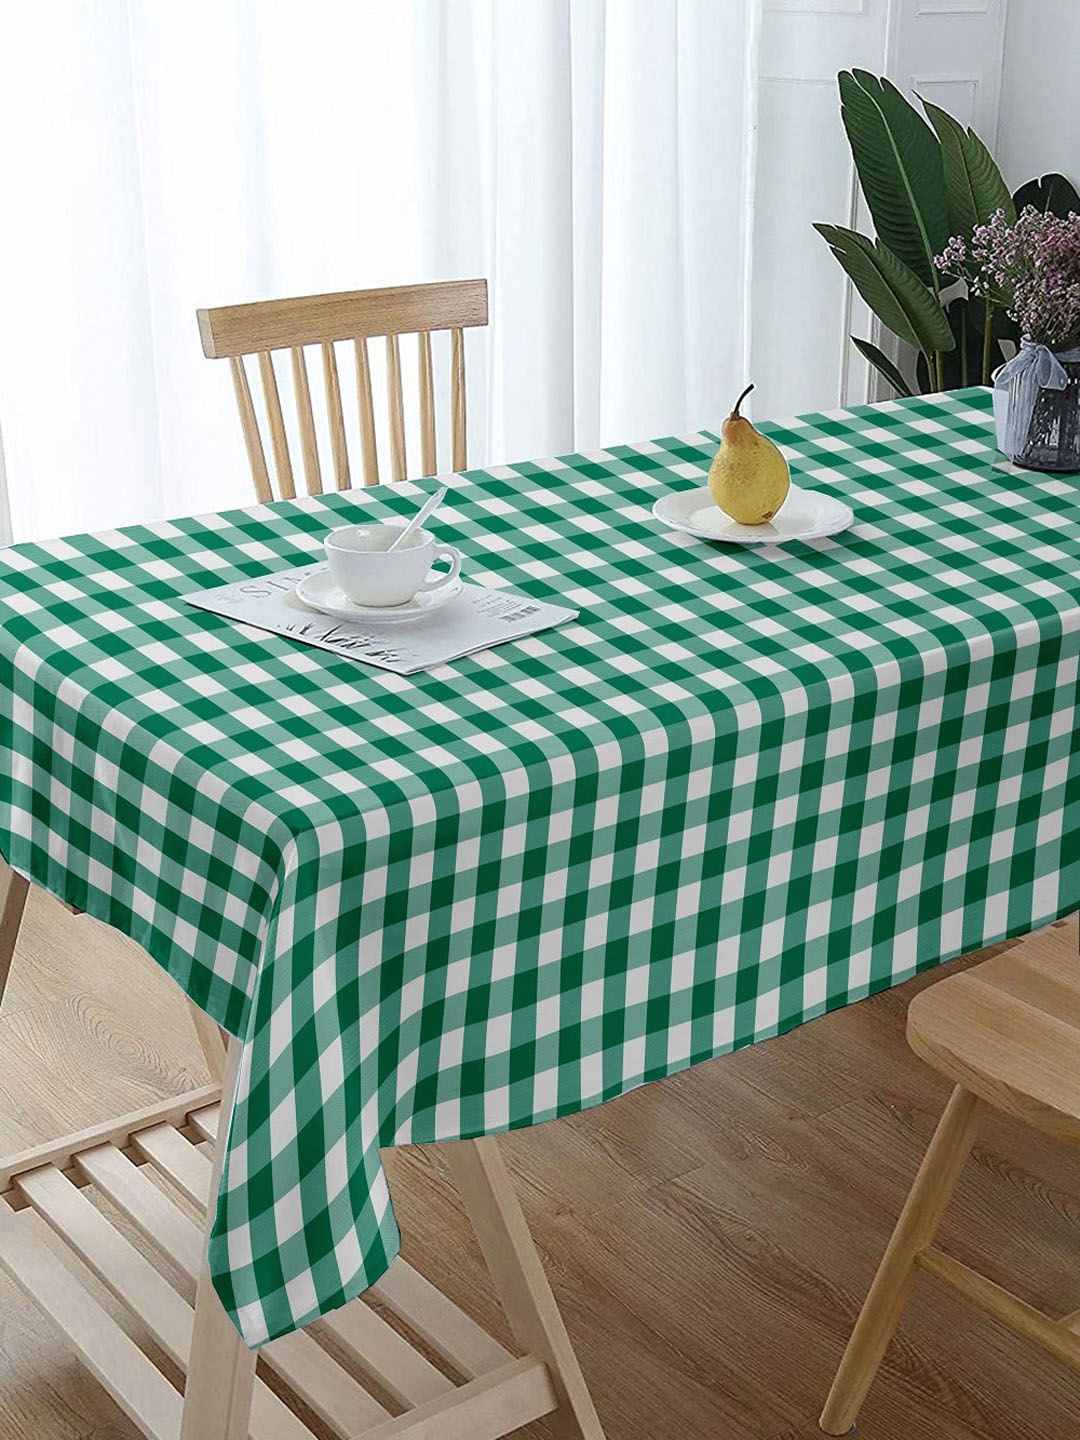 Lushomes Green & White Cotton Checked 6-Seater Rectangular Table Cover Price in India